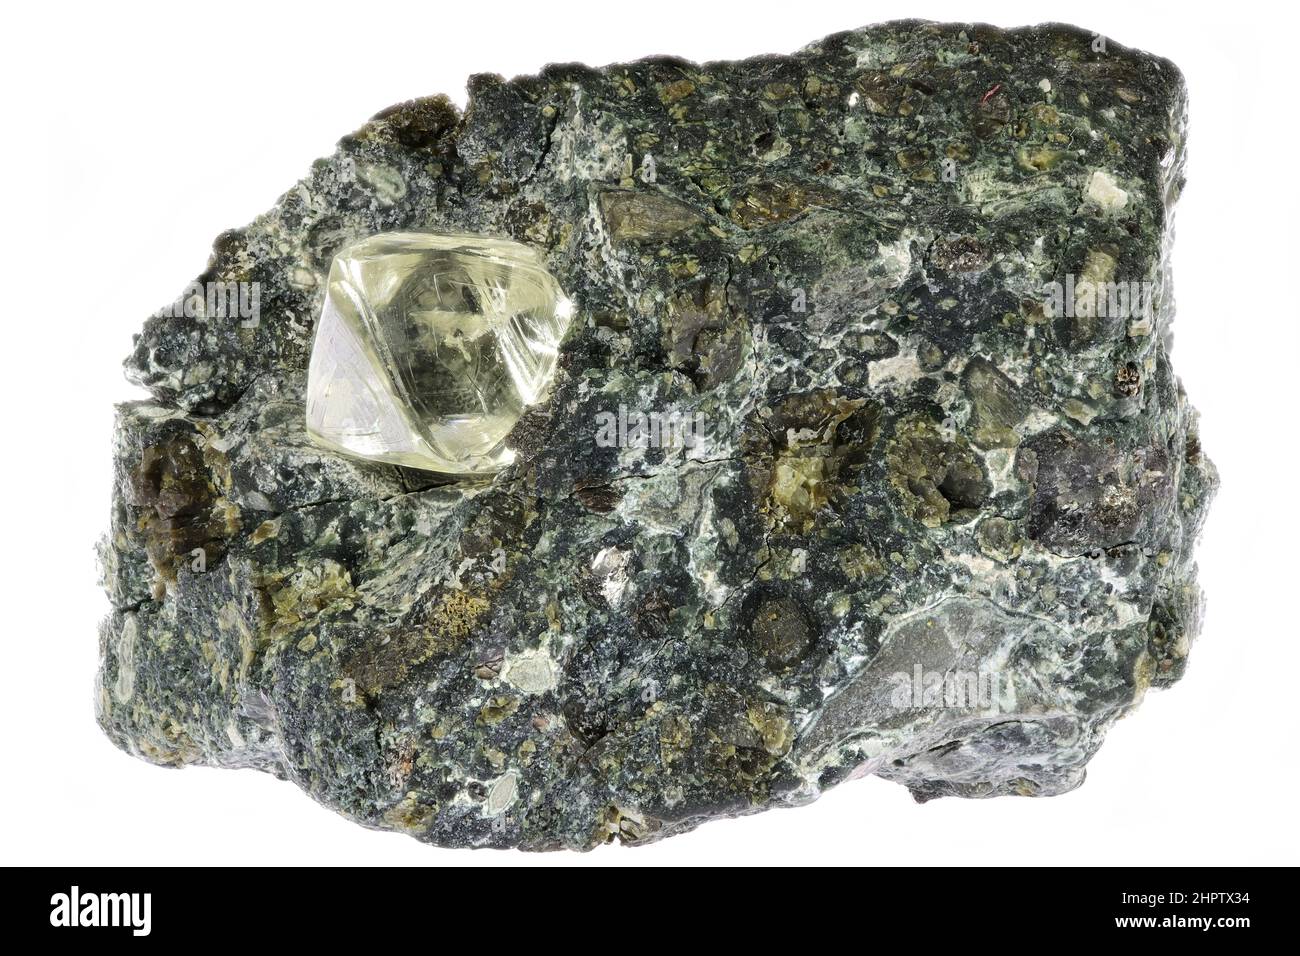 055 Ct Octahedral Diamond From South Africa Nestled In Kimberlite